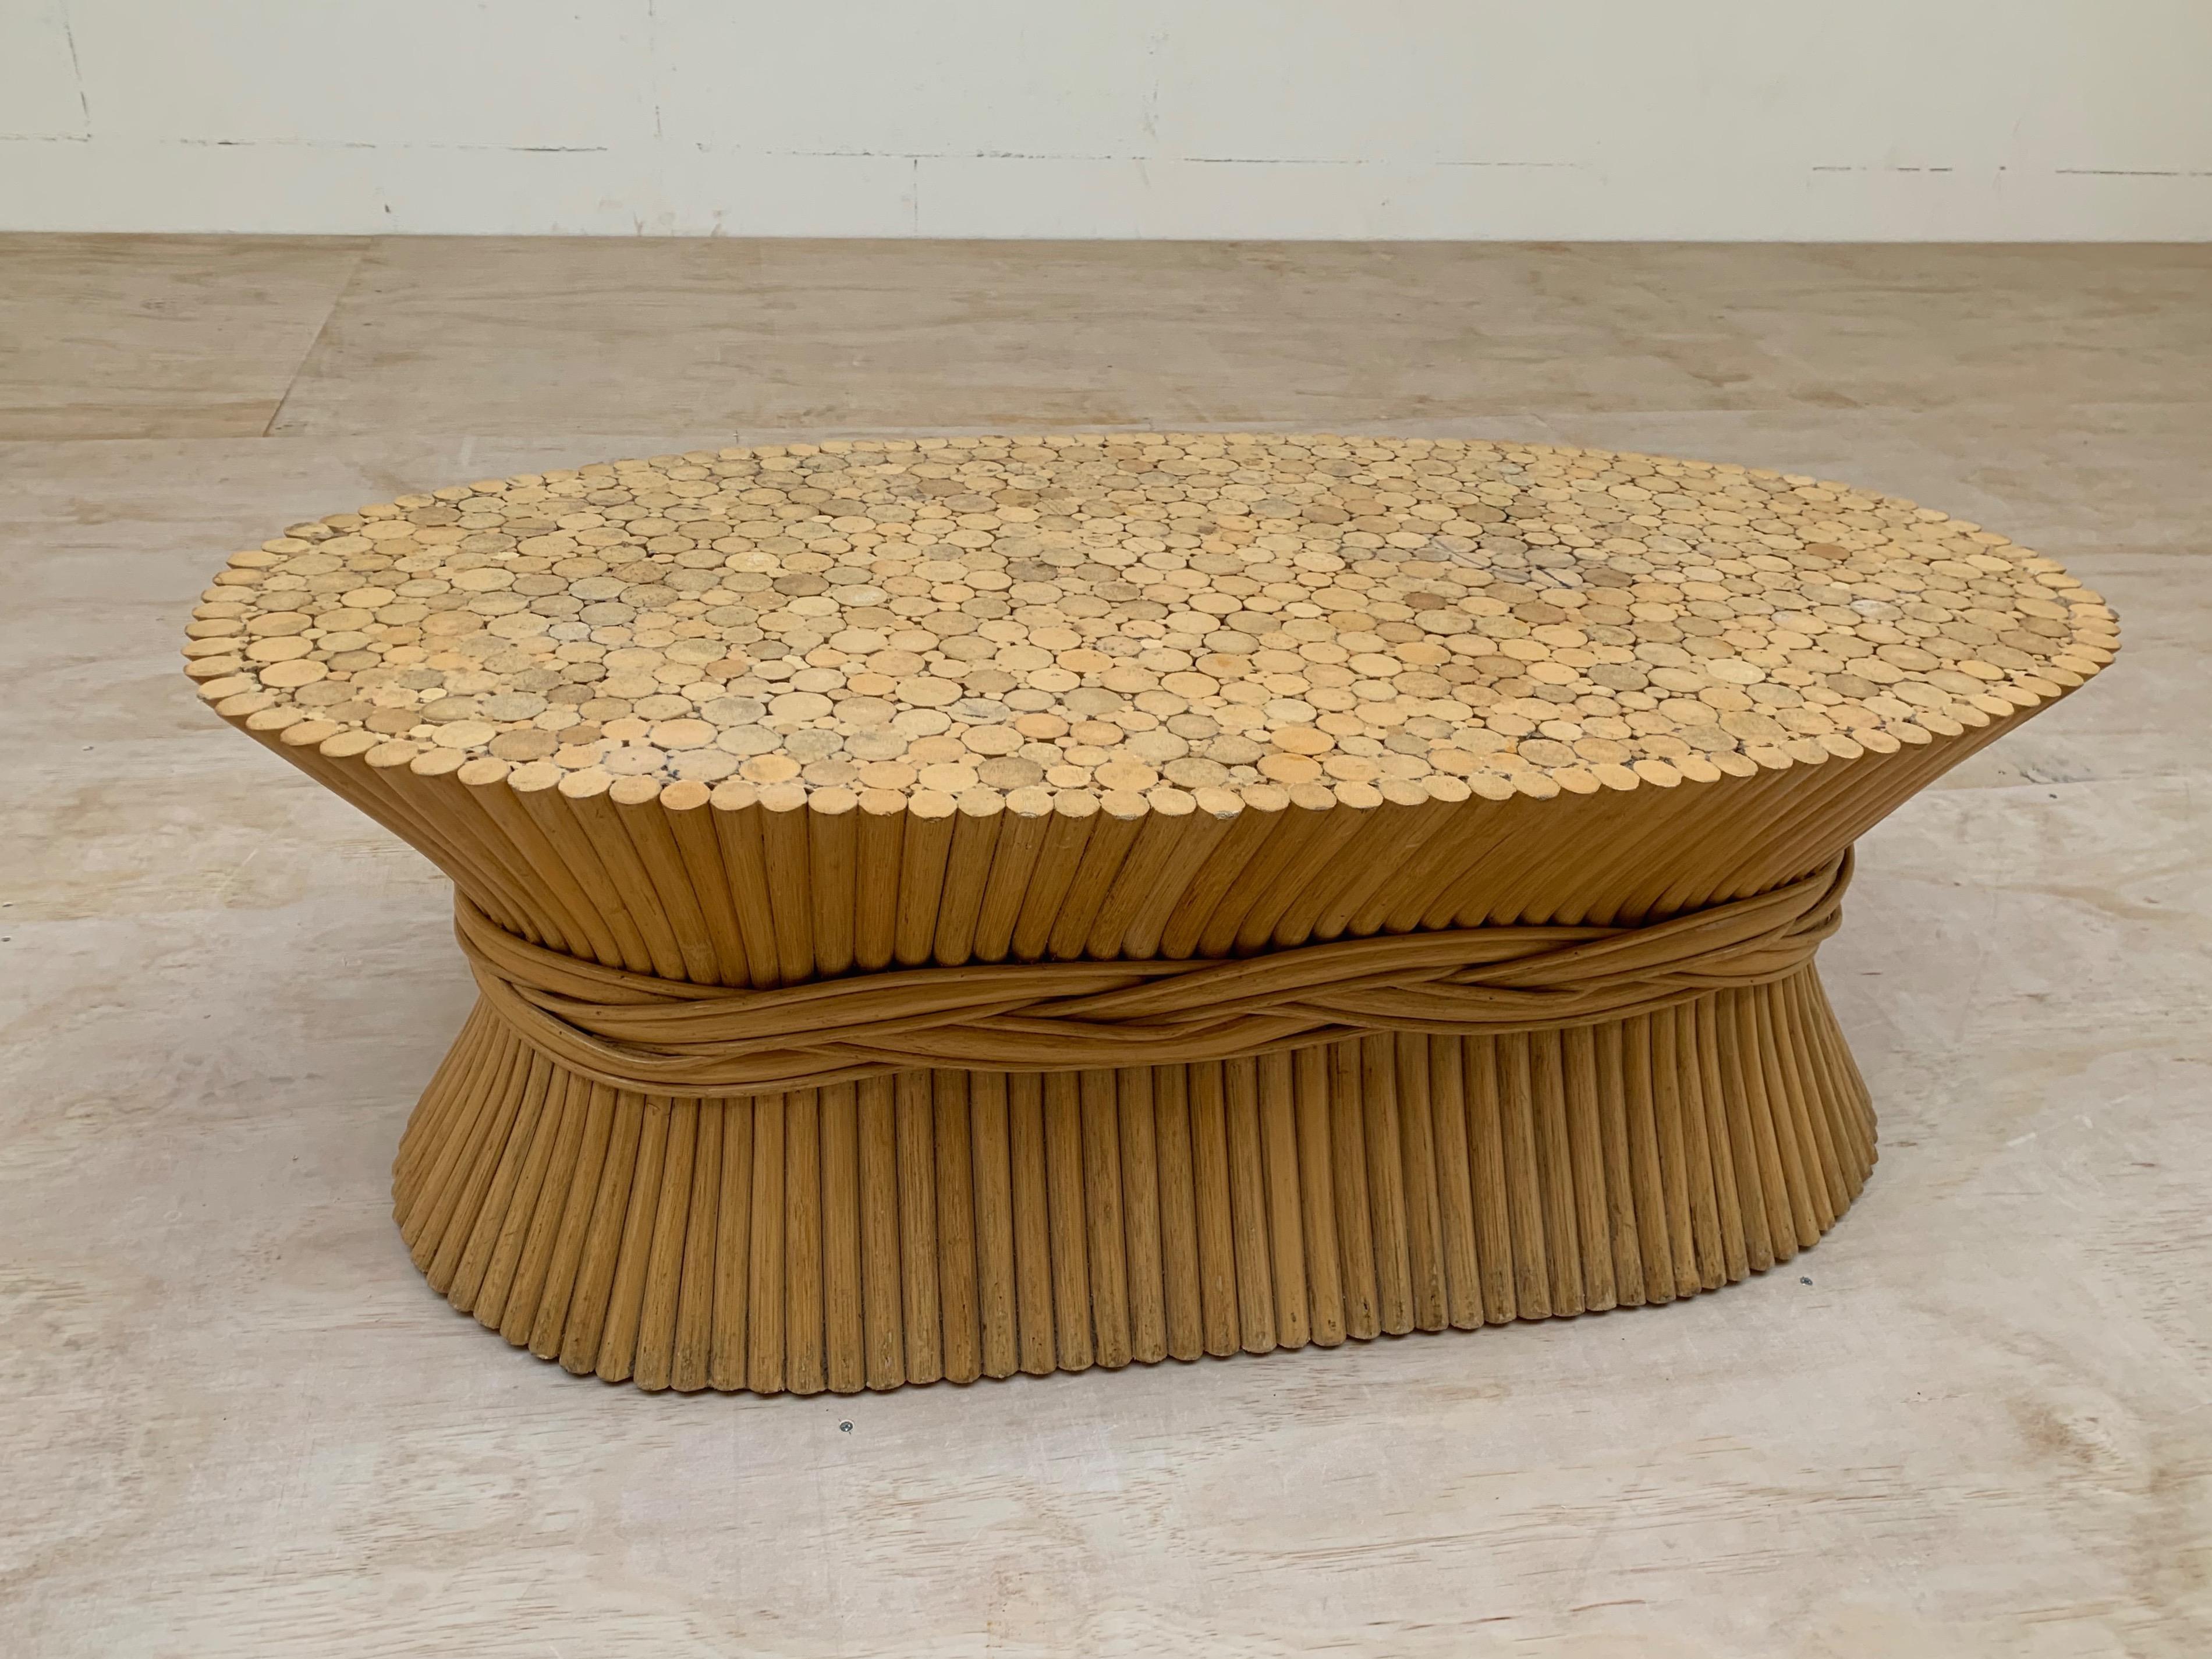 Original midcentury made, oval shape McGuire table.

This decorative and organically stylish table has the perfect look of being cinched into a sheaf of wheat. The wooden shafts of this rare design and sturdy table are stylishly encircled by a